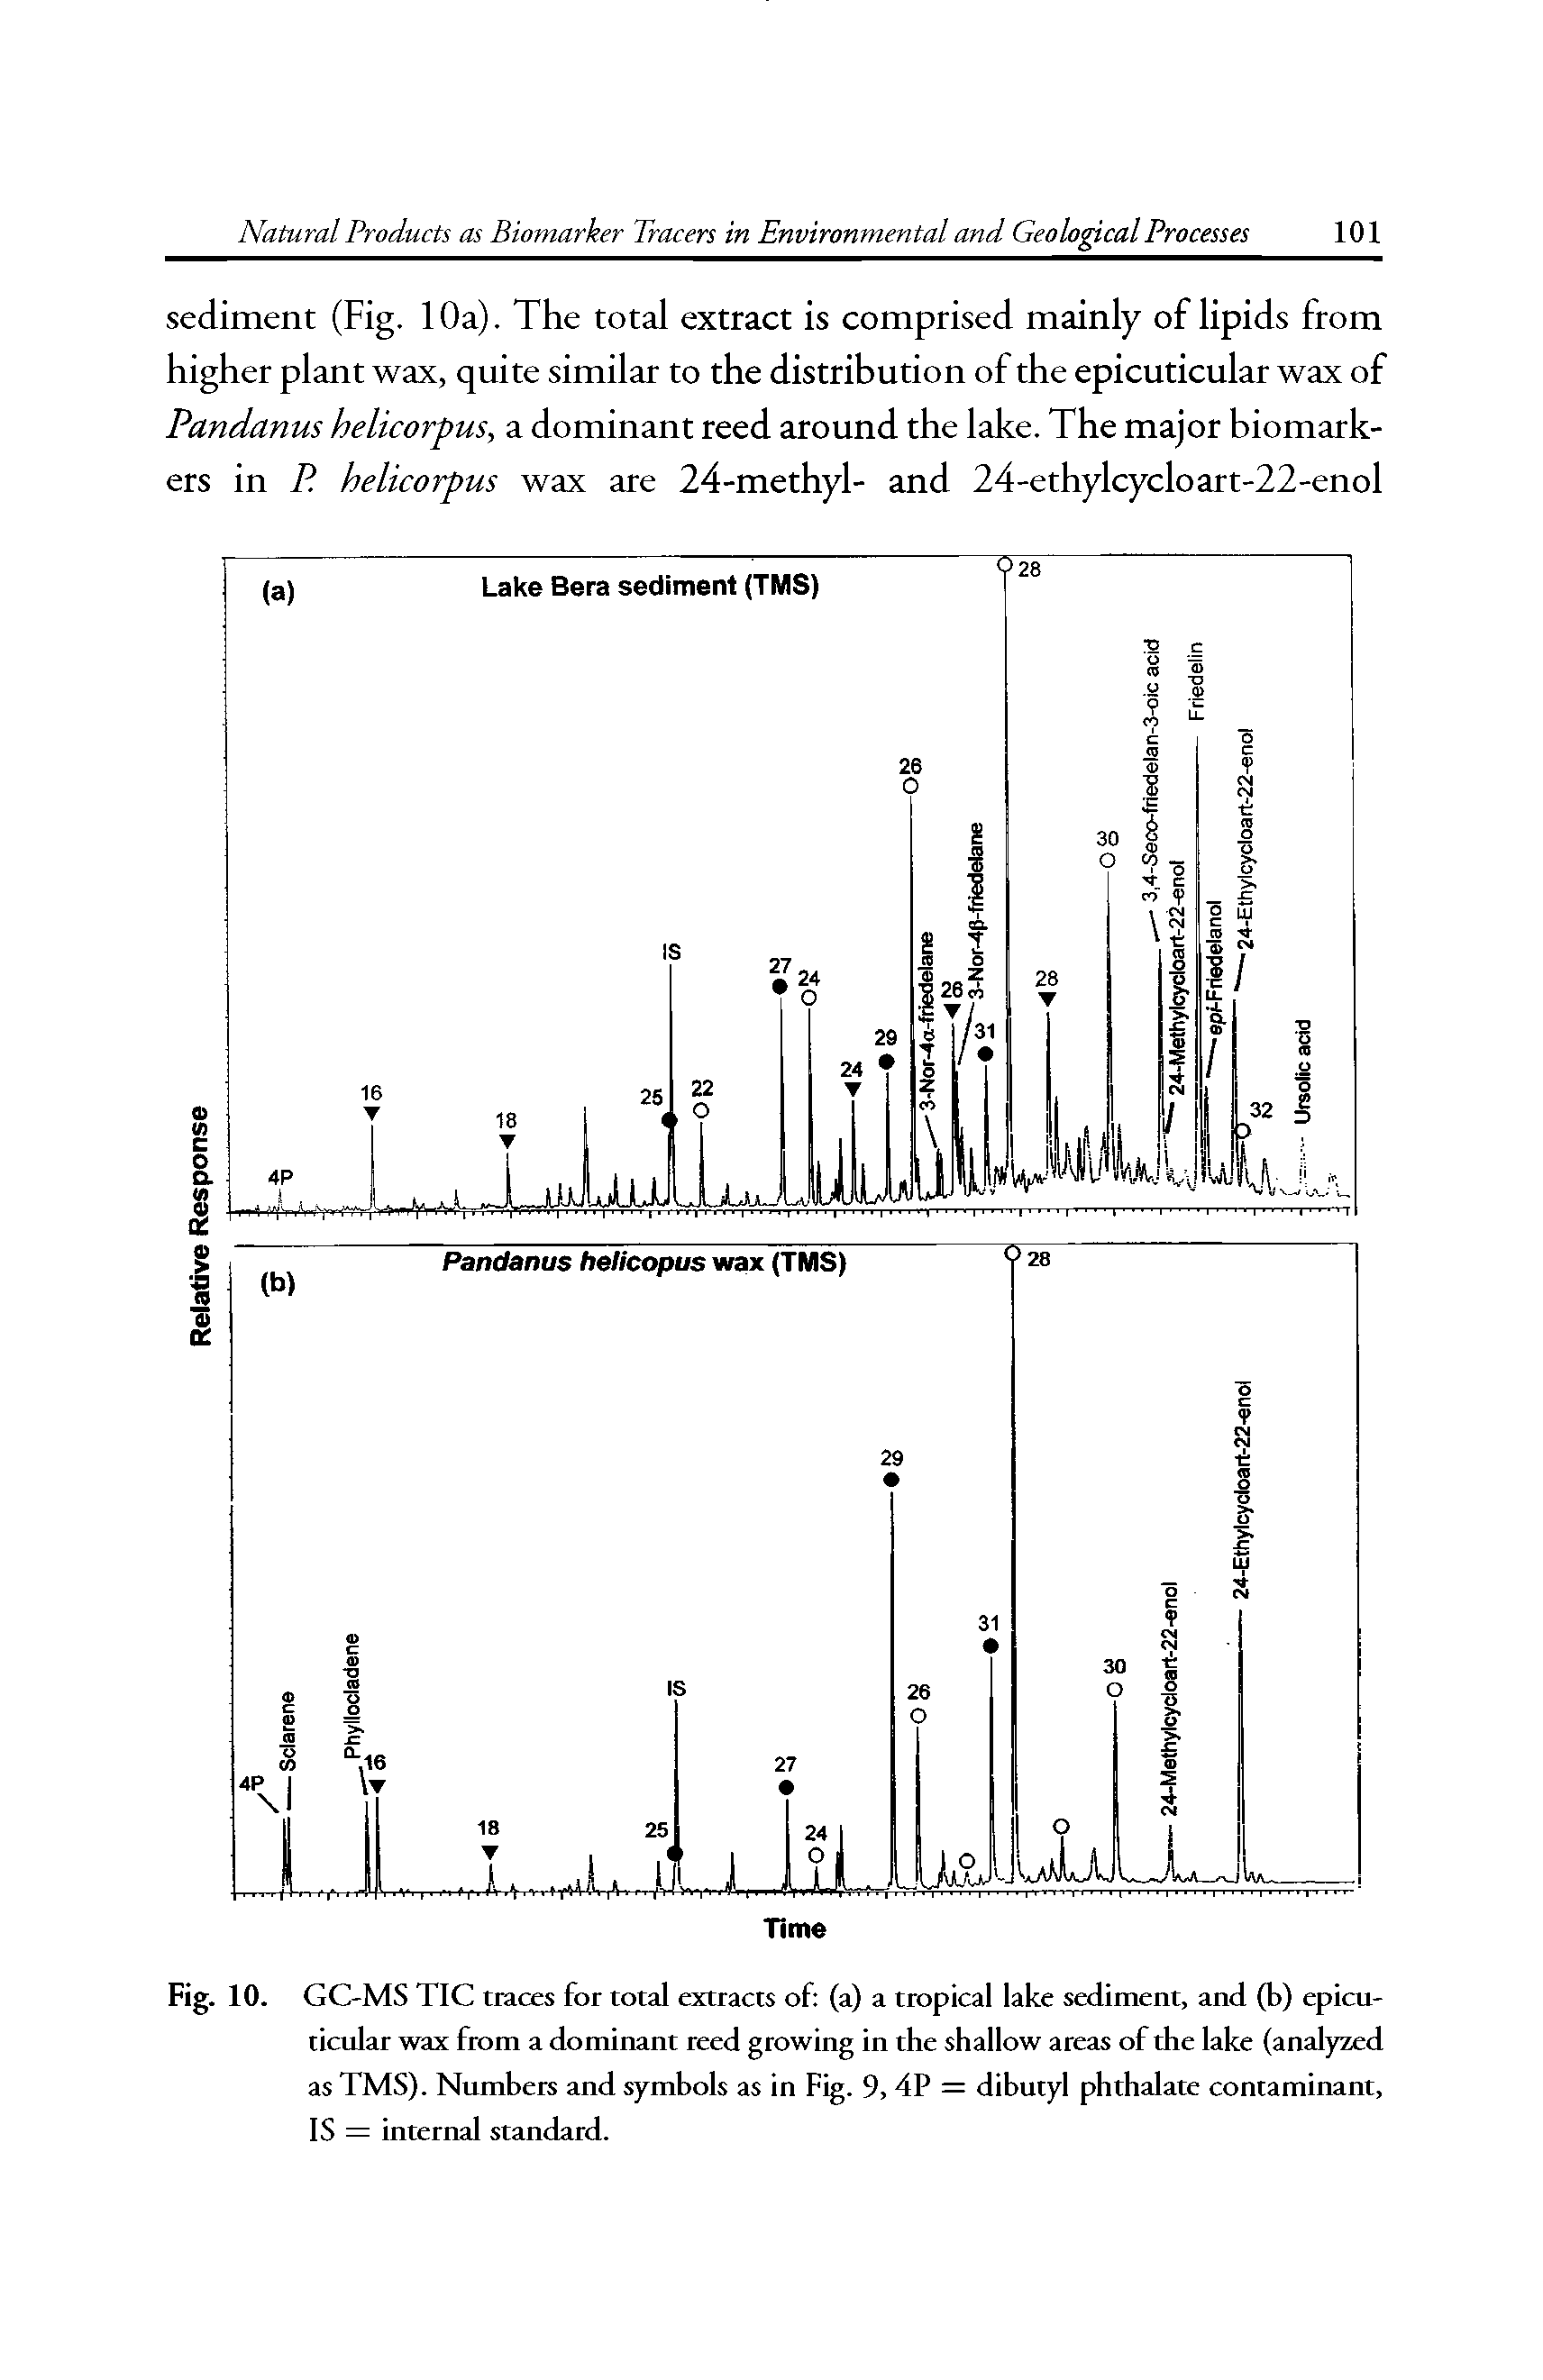 Fig. 10. GC MS TIC traces for total extracts of (a) a tropical lake sediment, and (b) epicu-ticular wax from a dominant reed growing in the shallow areas of the lake (analyzed as TMS). Numbers and symbols as in Fig. 9, 4P = dibutyl phthalate contaminant, IS = internal standard.